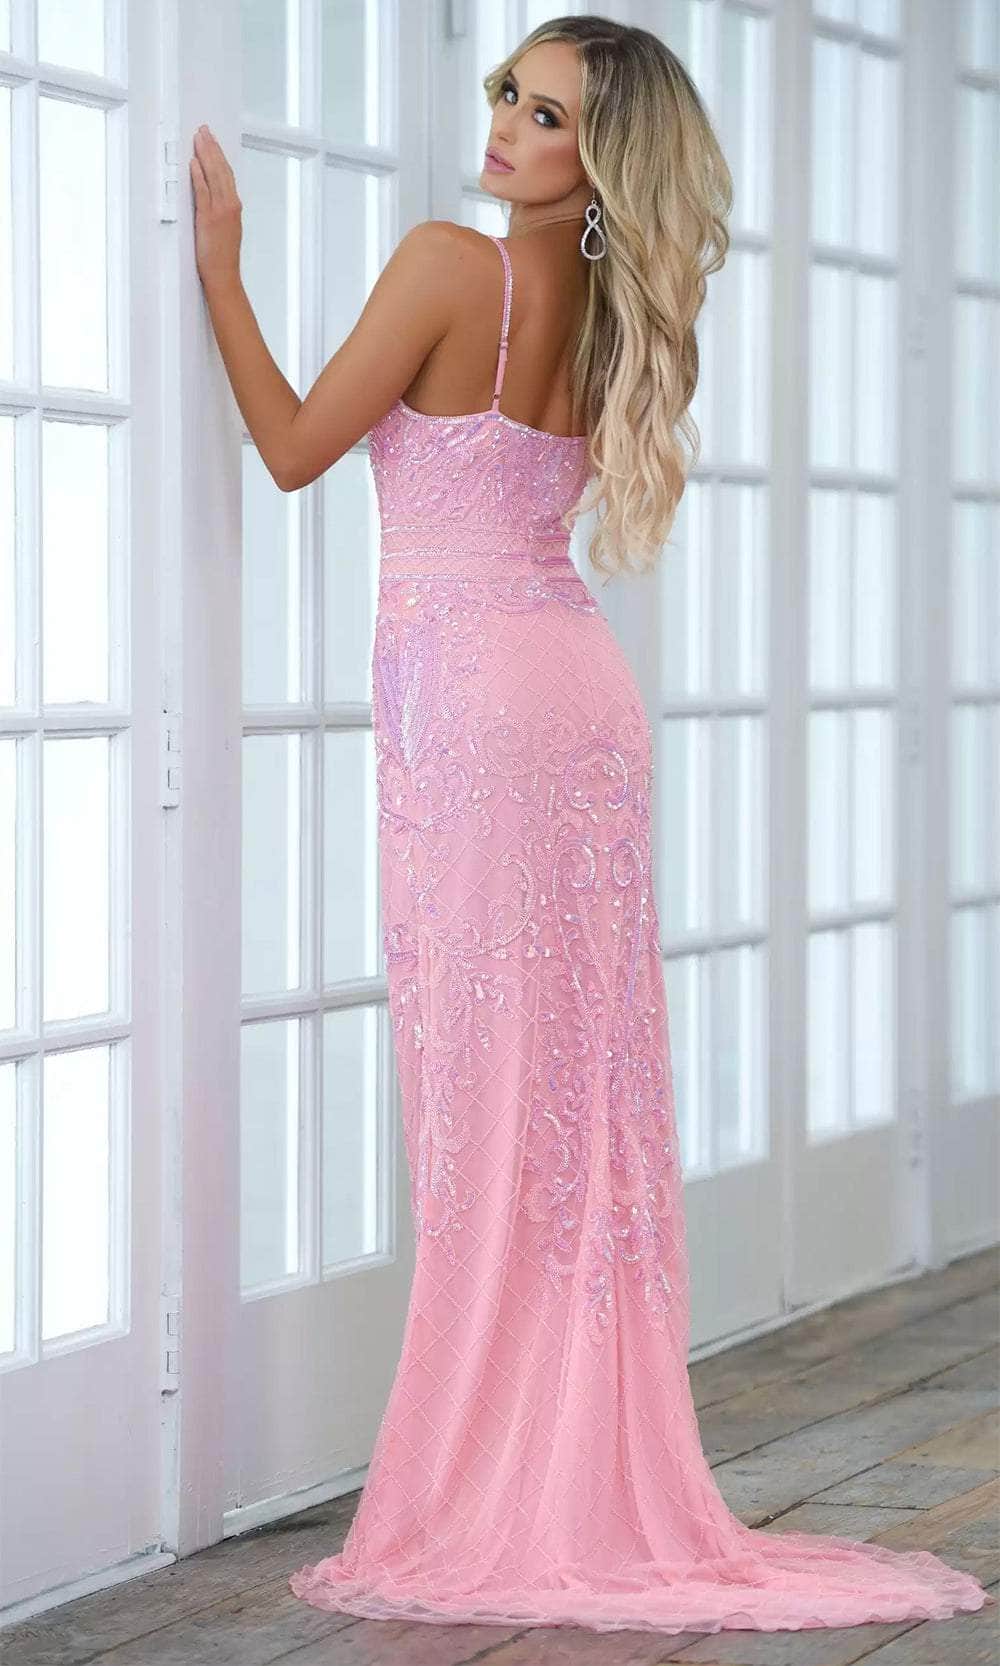 Aleta Couture 716L - Semi Sweetheart Neck Sequin Gown Prom Dresses